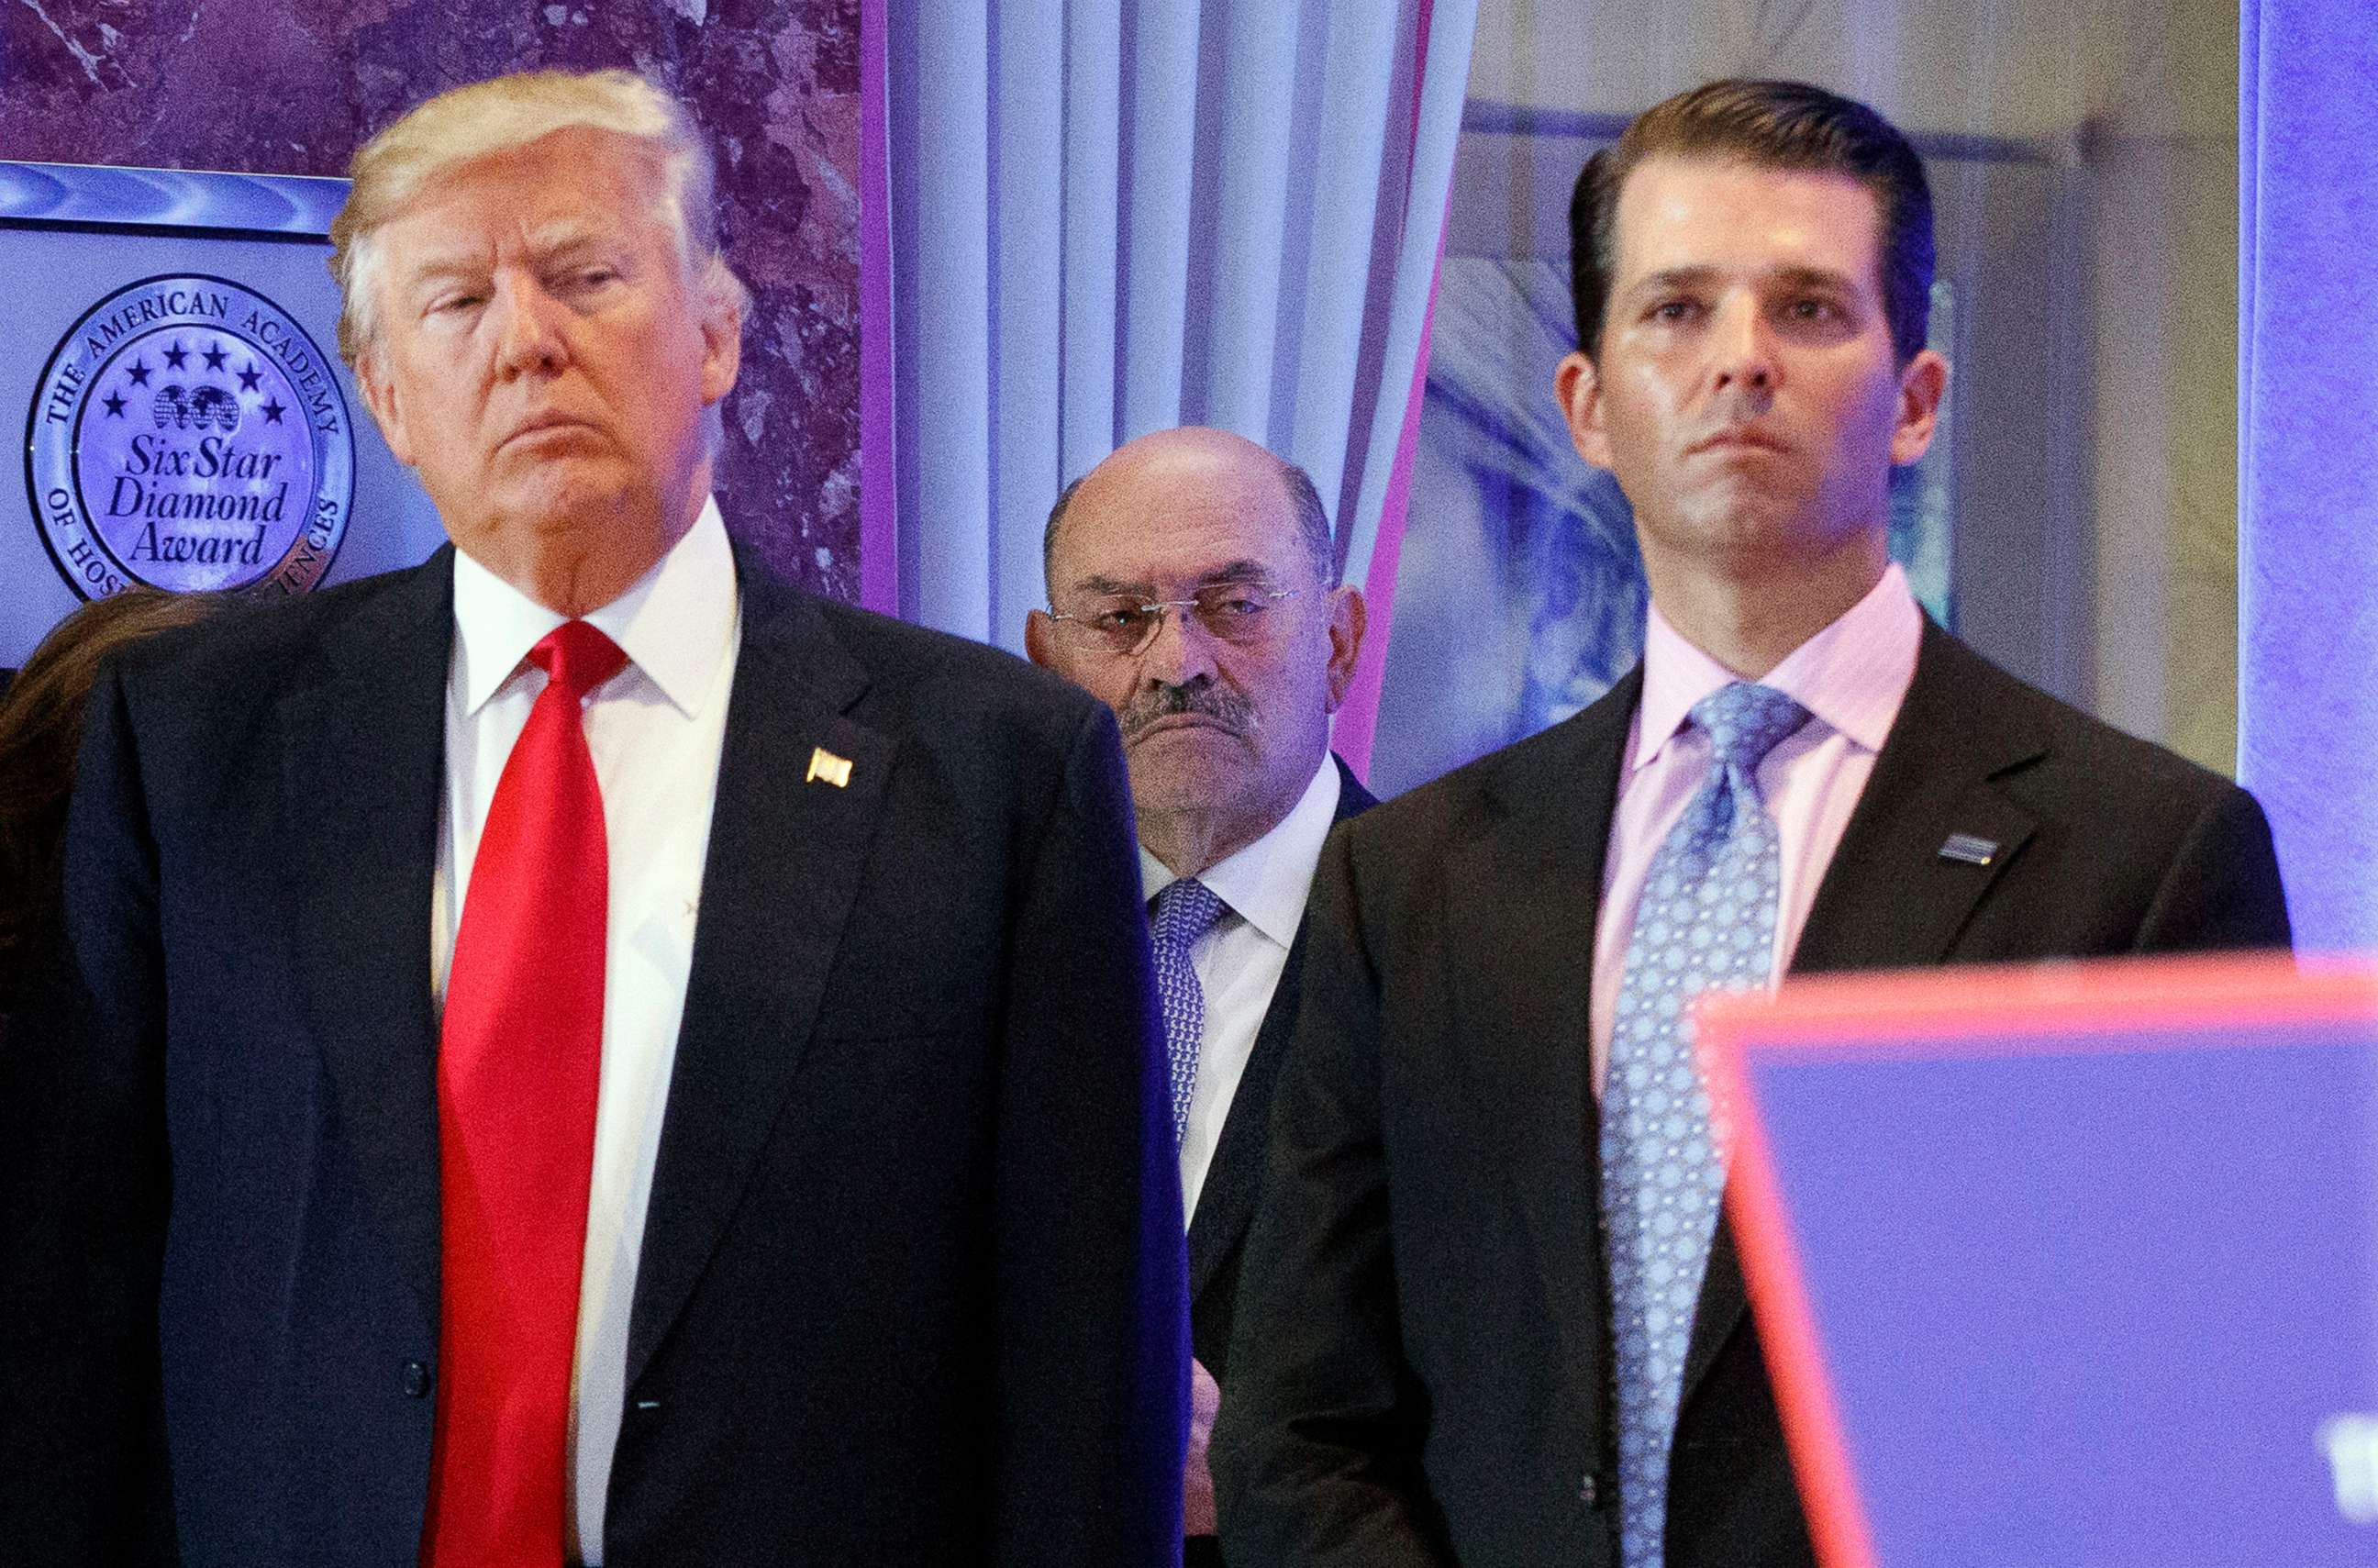 PHOTO: In this Jan. 11, 2017, file photo, Allen Weisselberg, center, stands between President-elect Donald Trump, left, and Donald Trump Jr., at a news conference in the lobby of Trump Tower in New York.